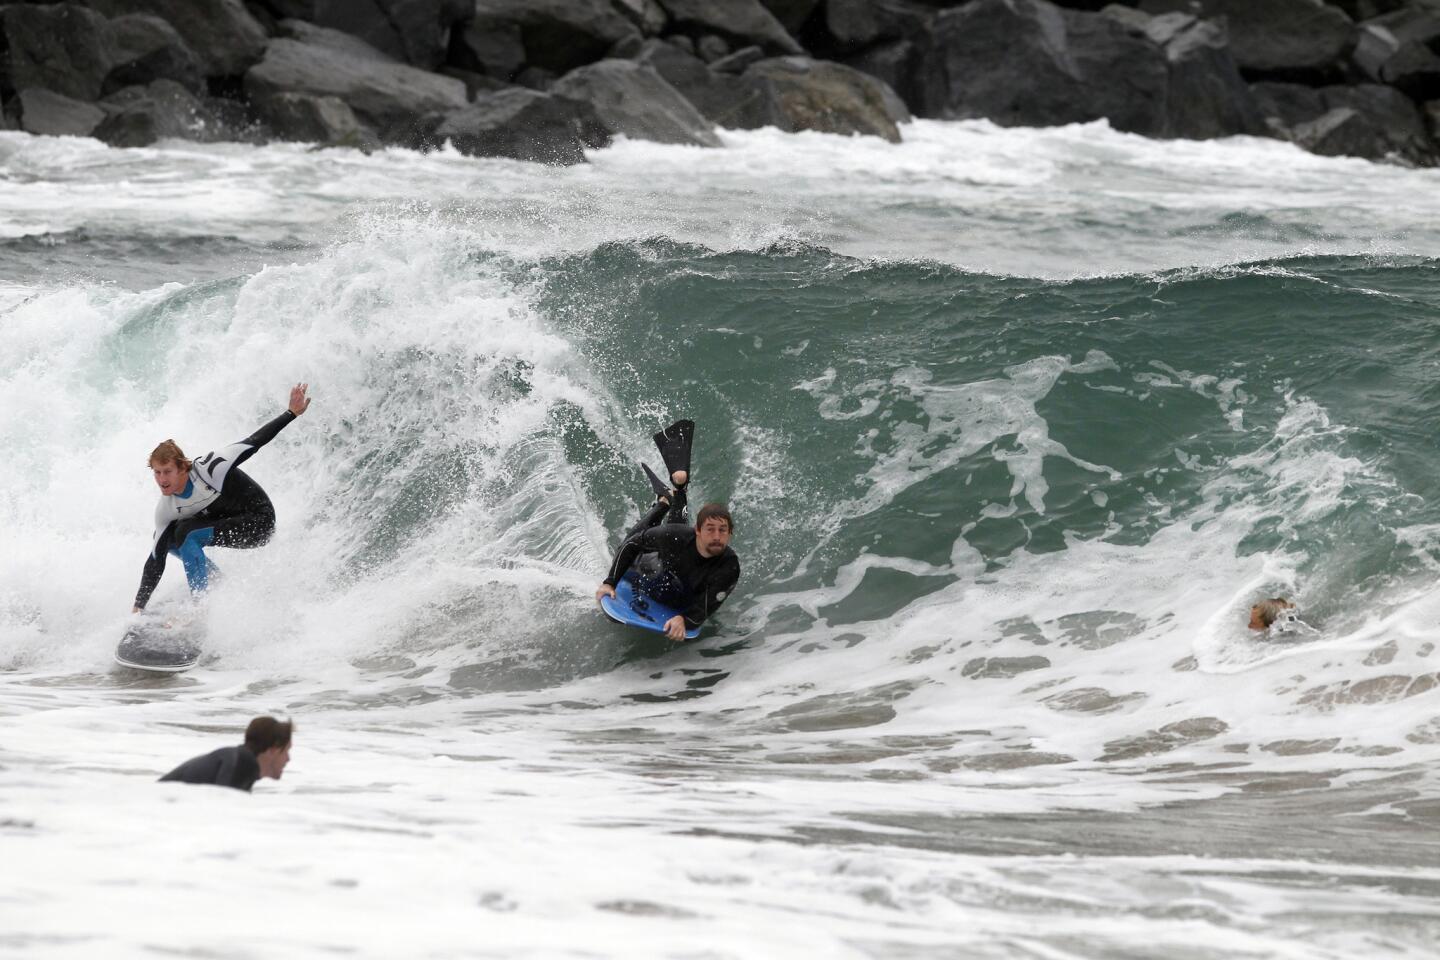 A surfer, bodyboarder and bodysurfer compete to ride a big wave at the Wedge in Newport Beach.